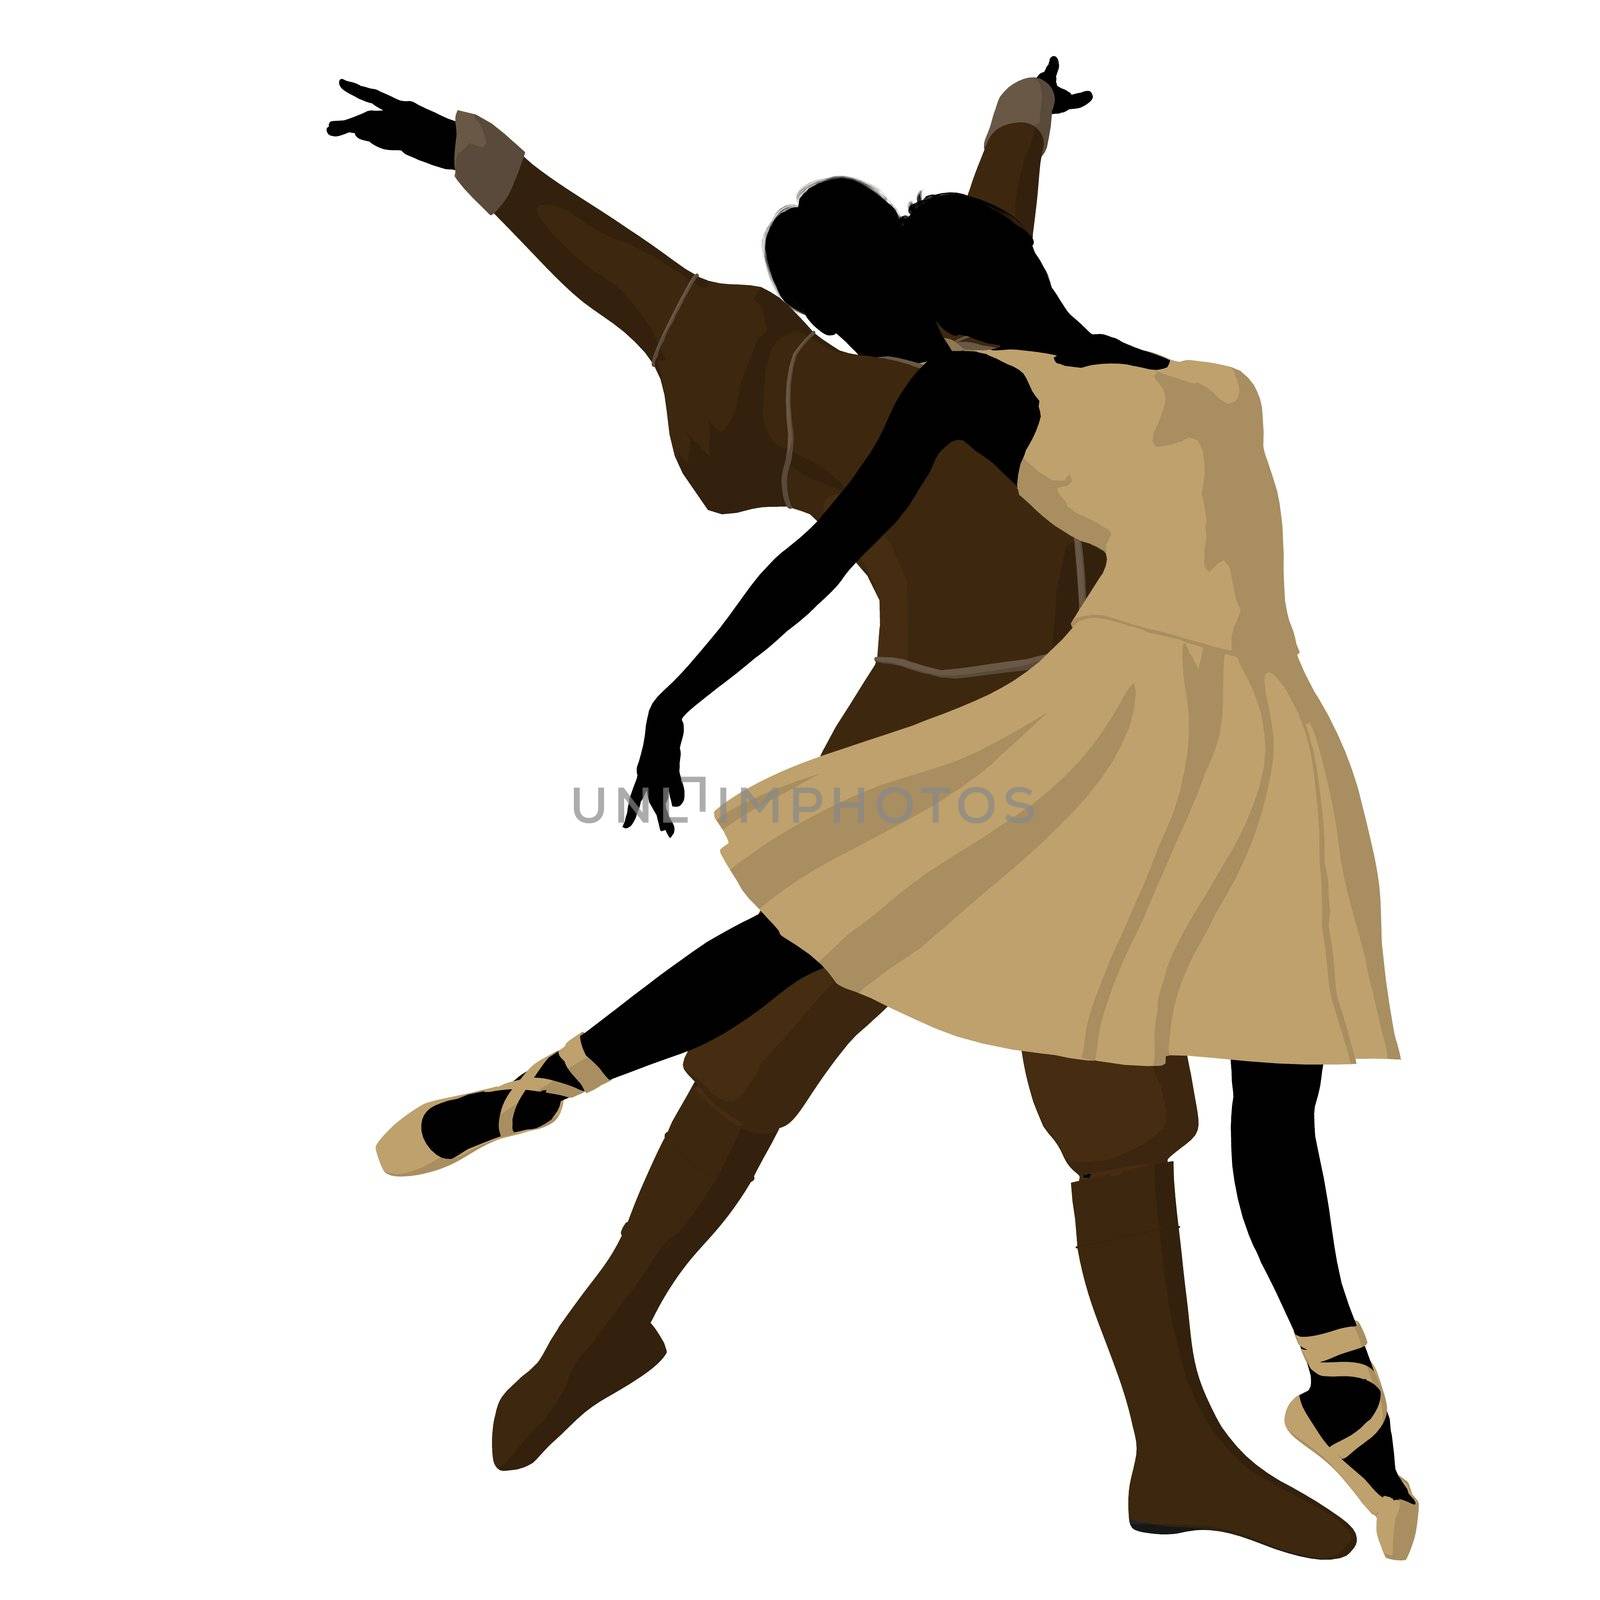 Ballet couple silhouette on a white background